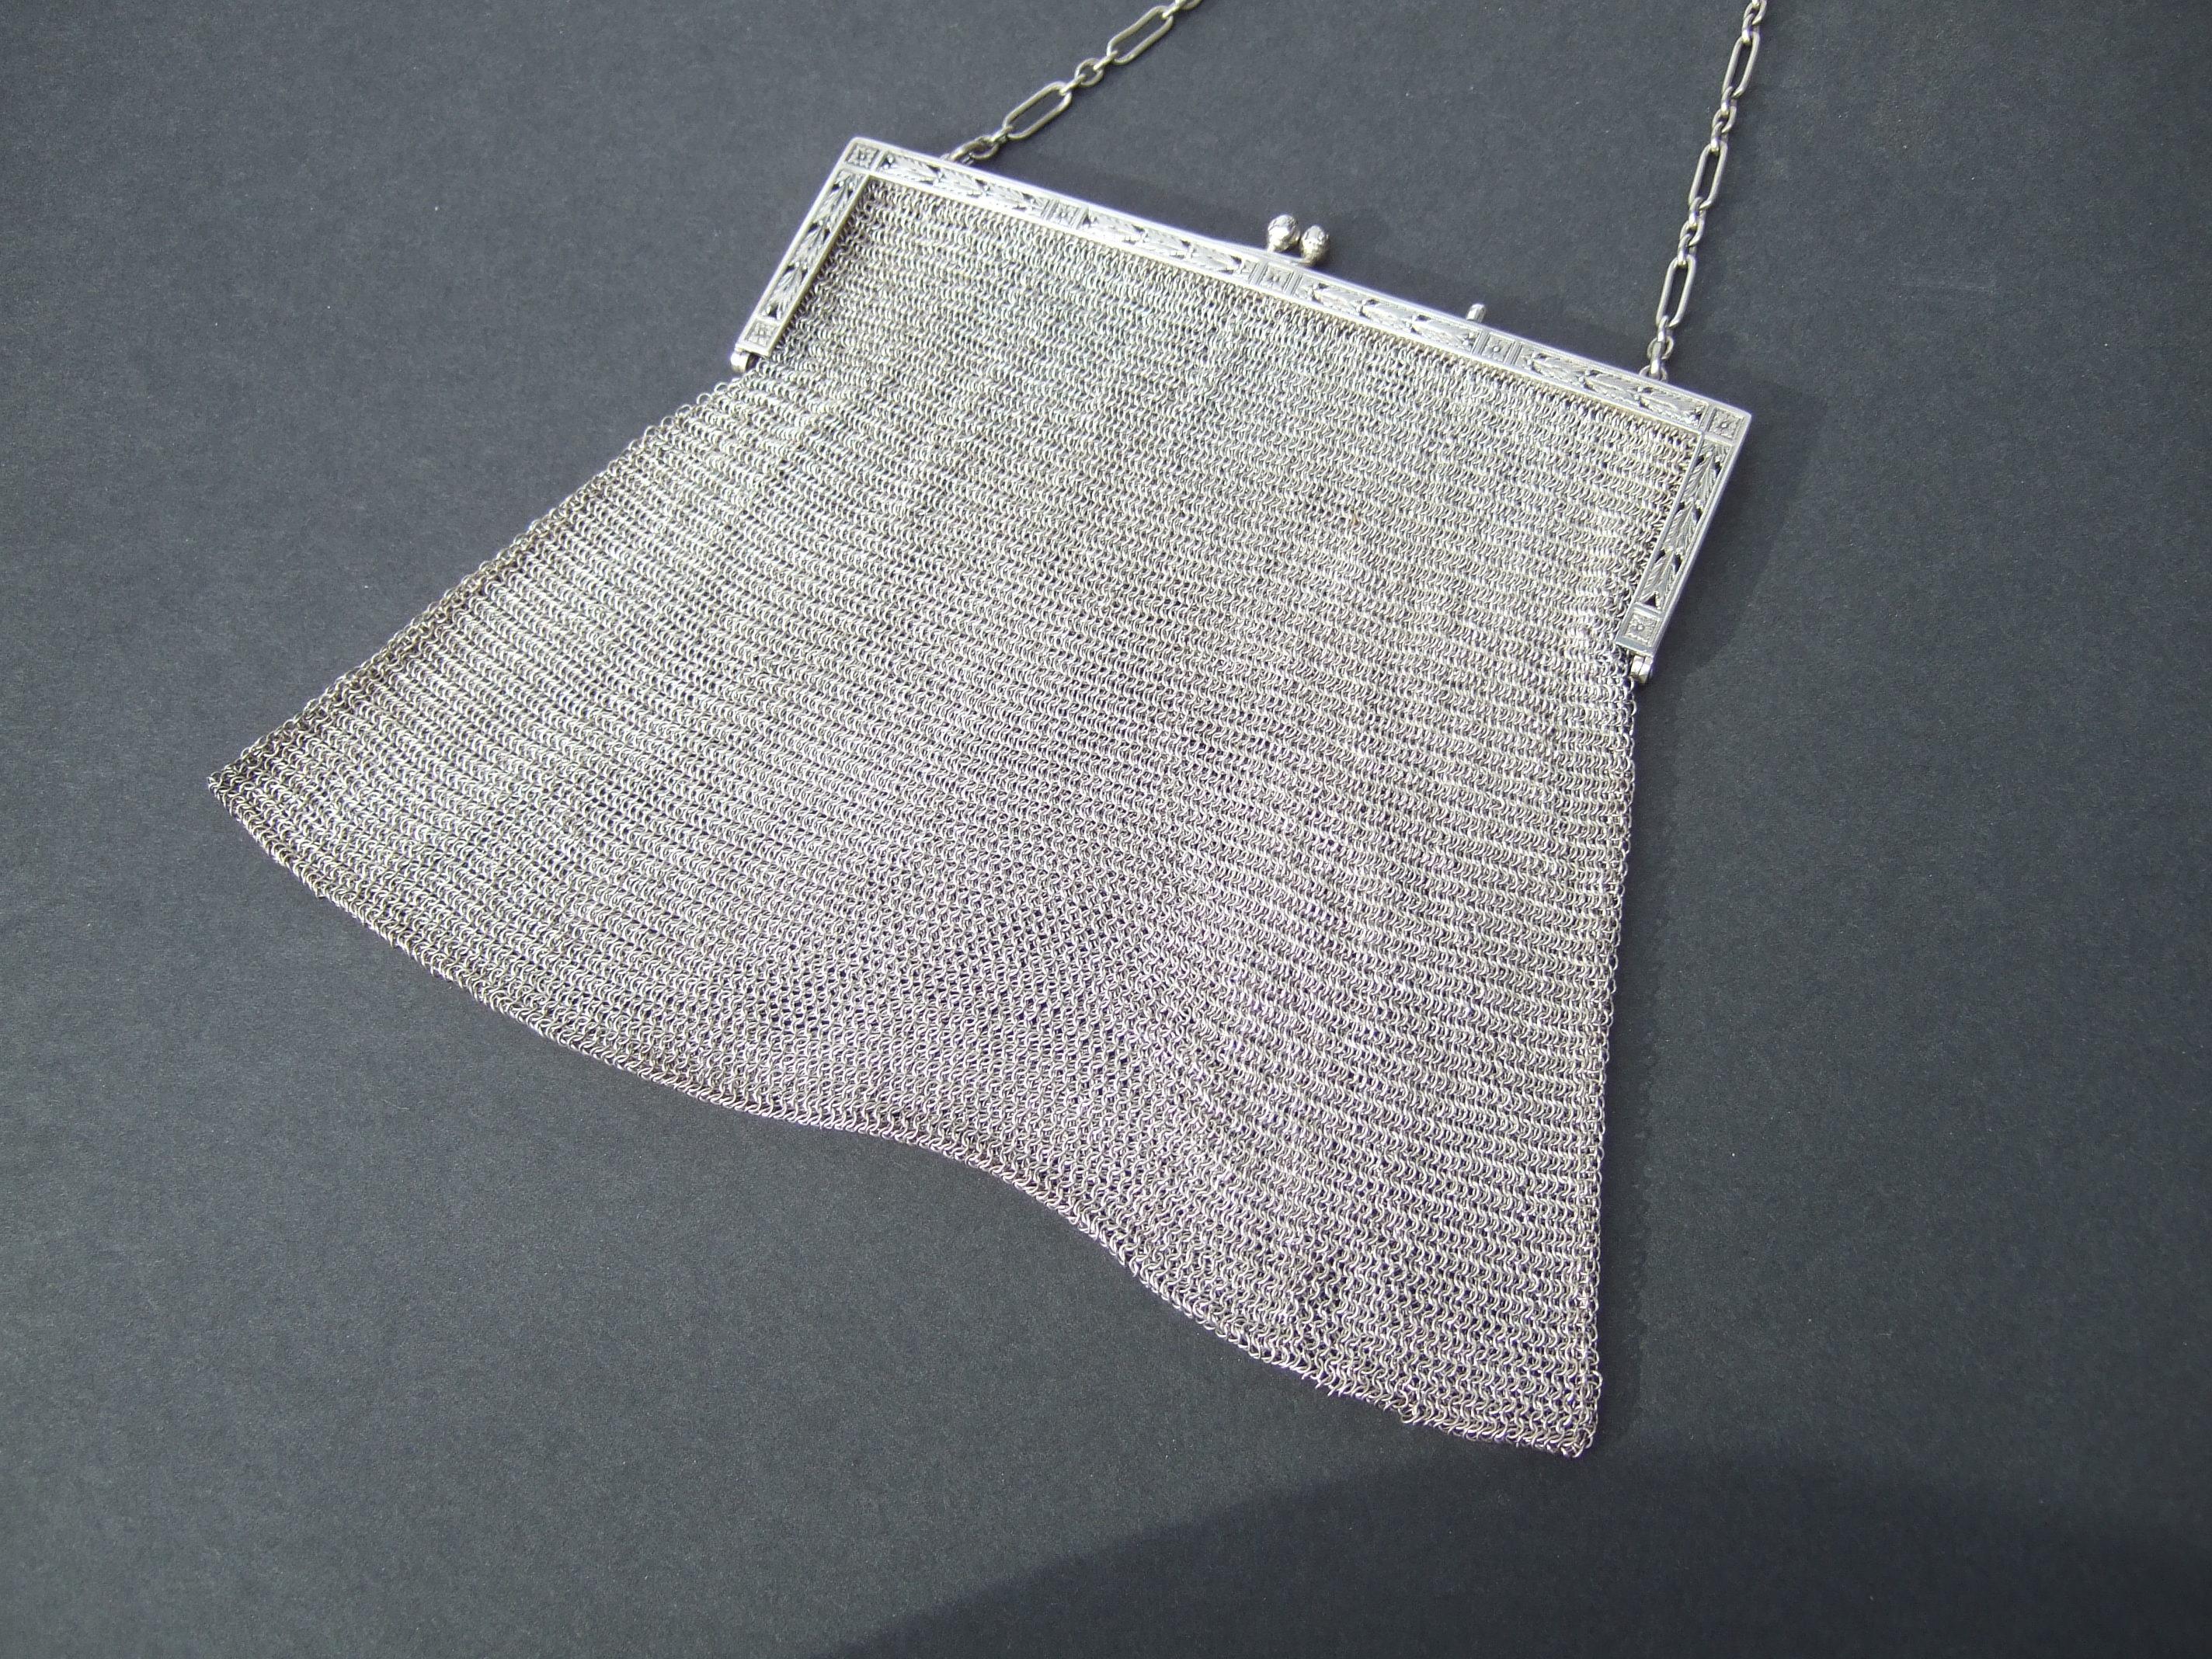 Tiffany & Co. Rare Sterling Silver Chain Mail Evening Bag c 1910 5